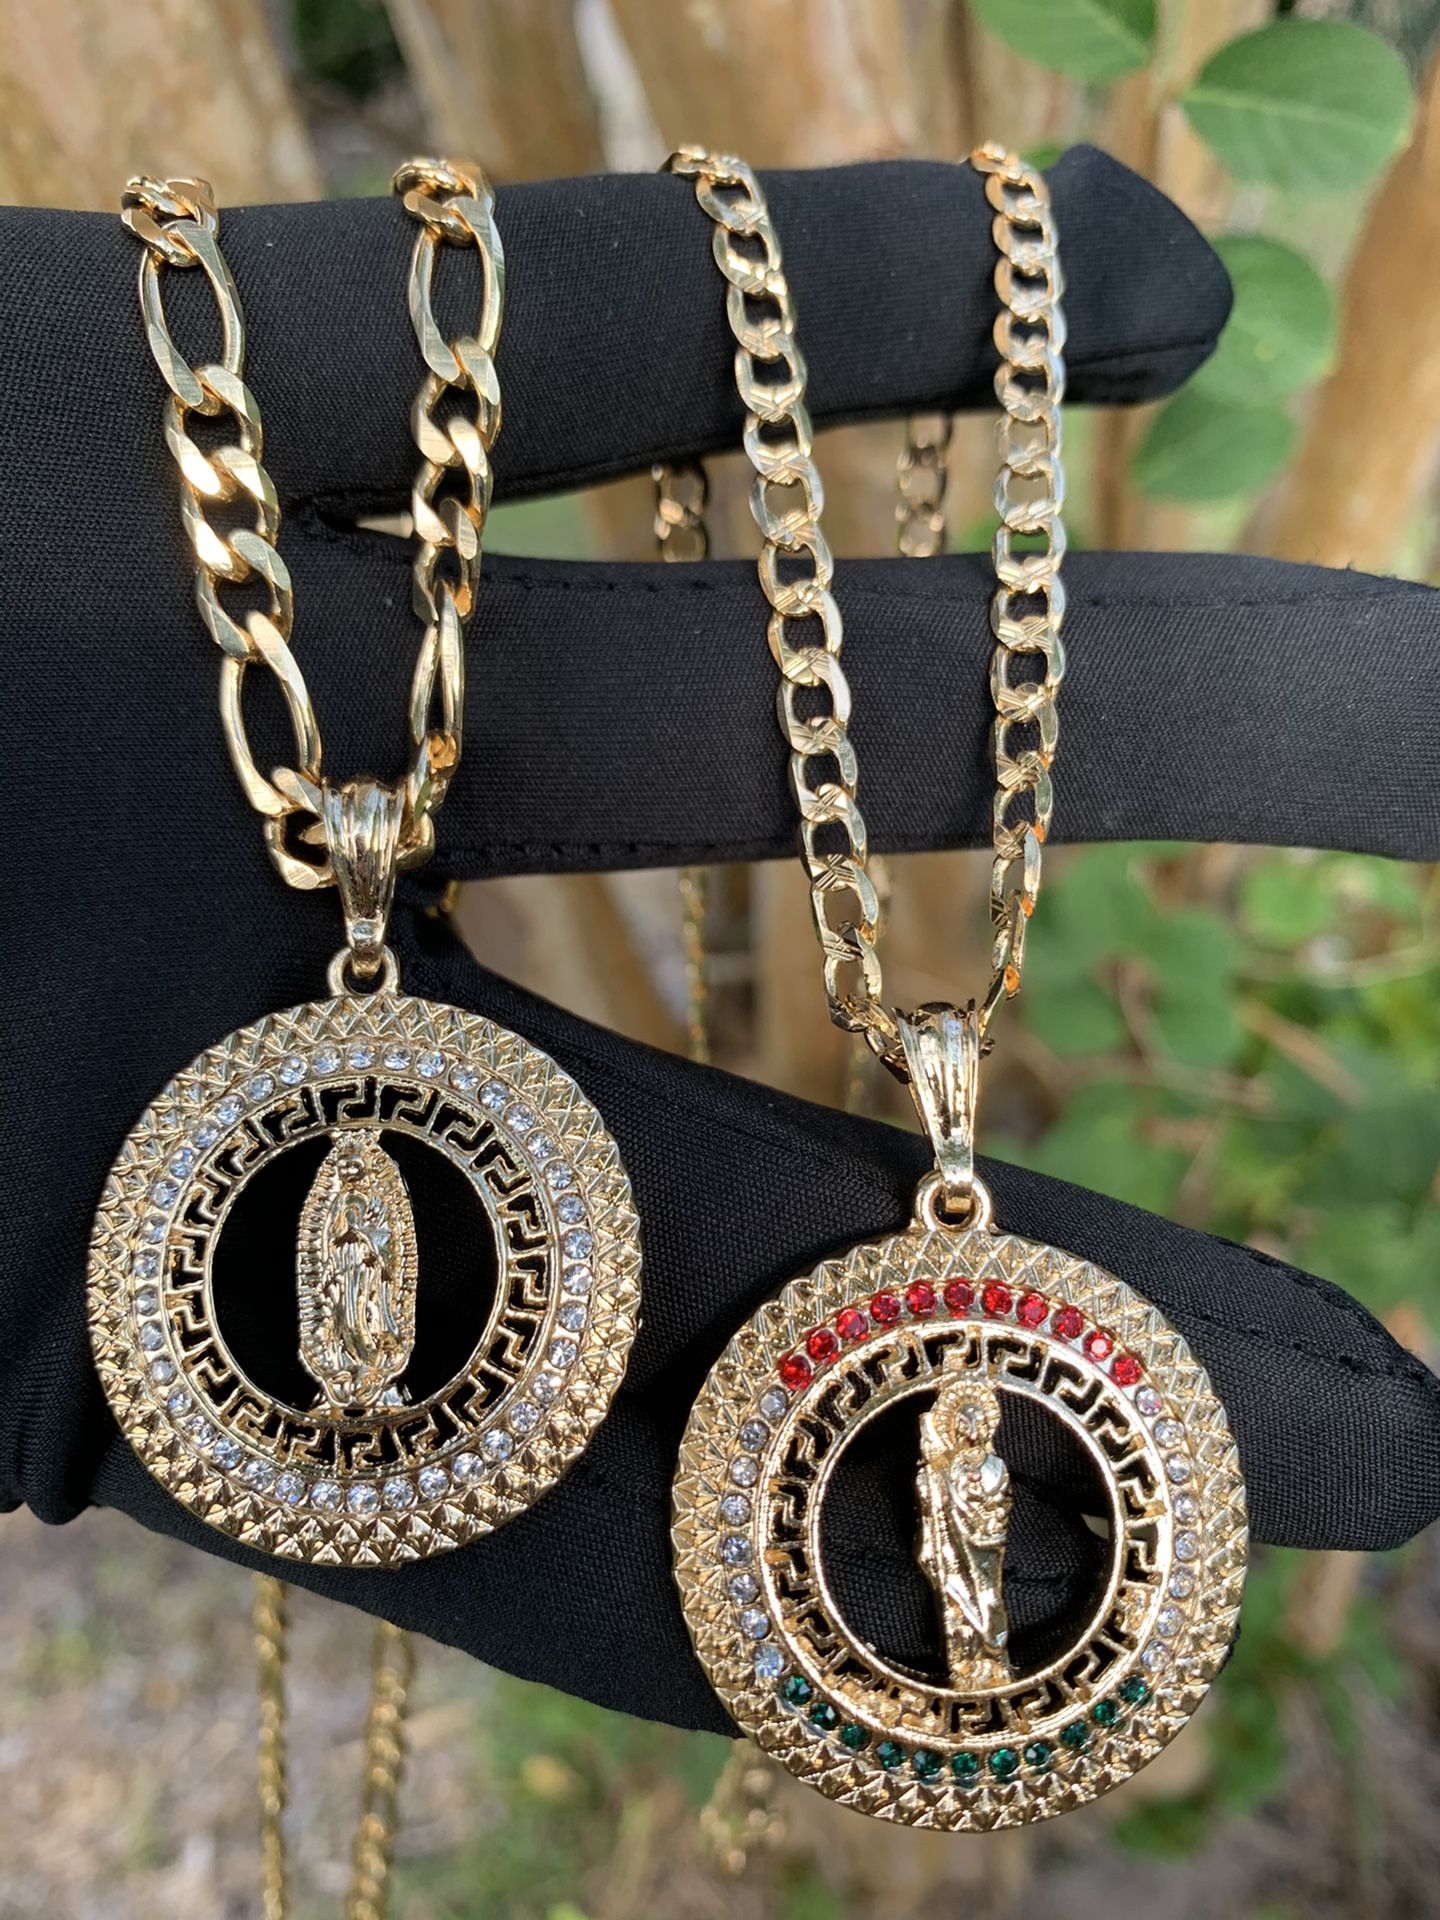 14k Gold filled chain with medallions